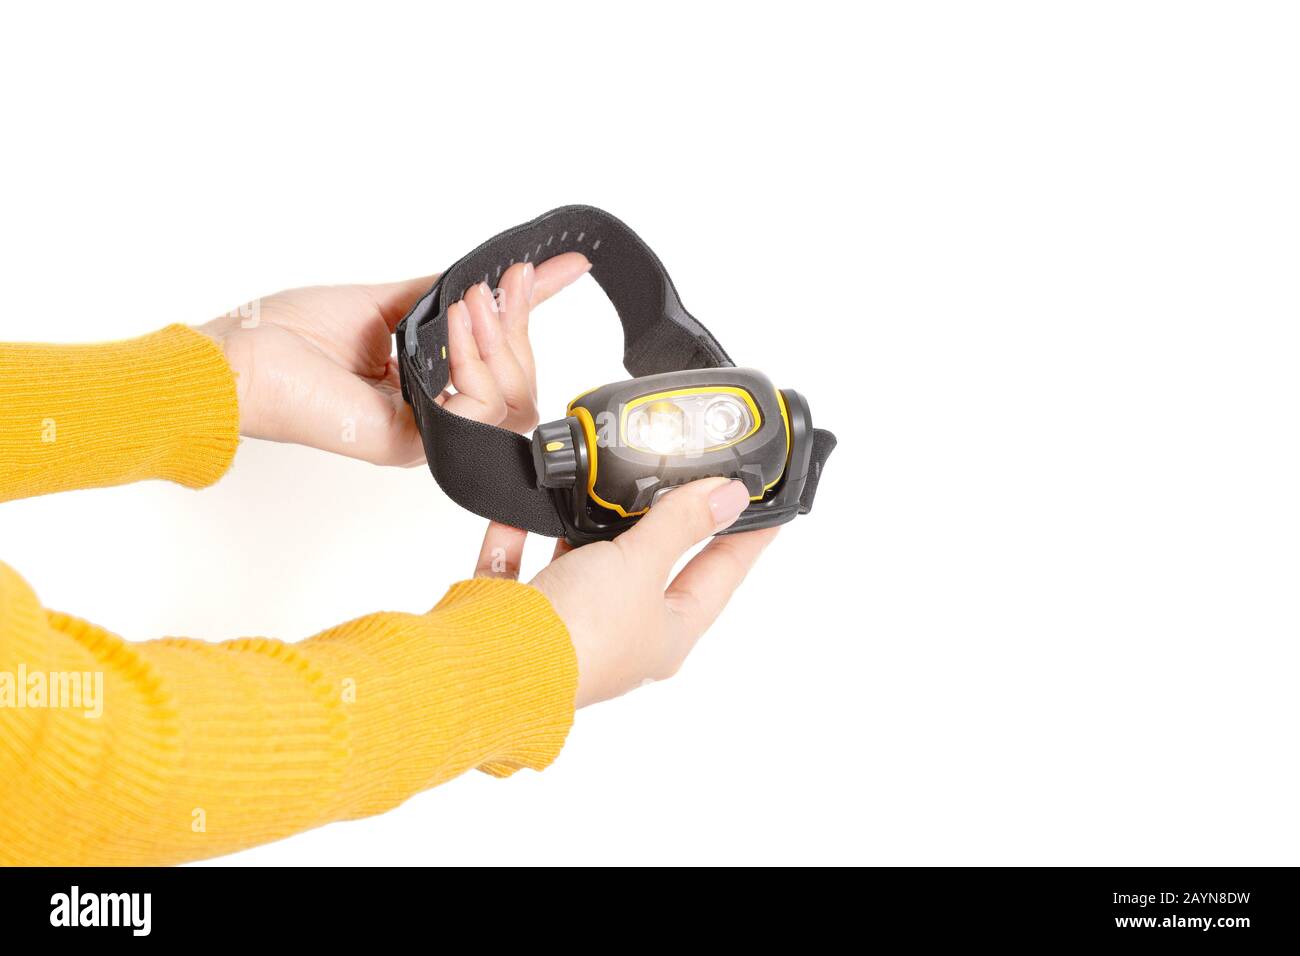 Head lamp flashlight with light beam in woman hands Stock Photo